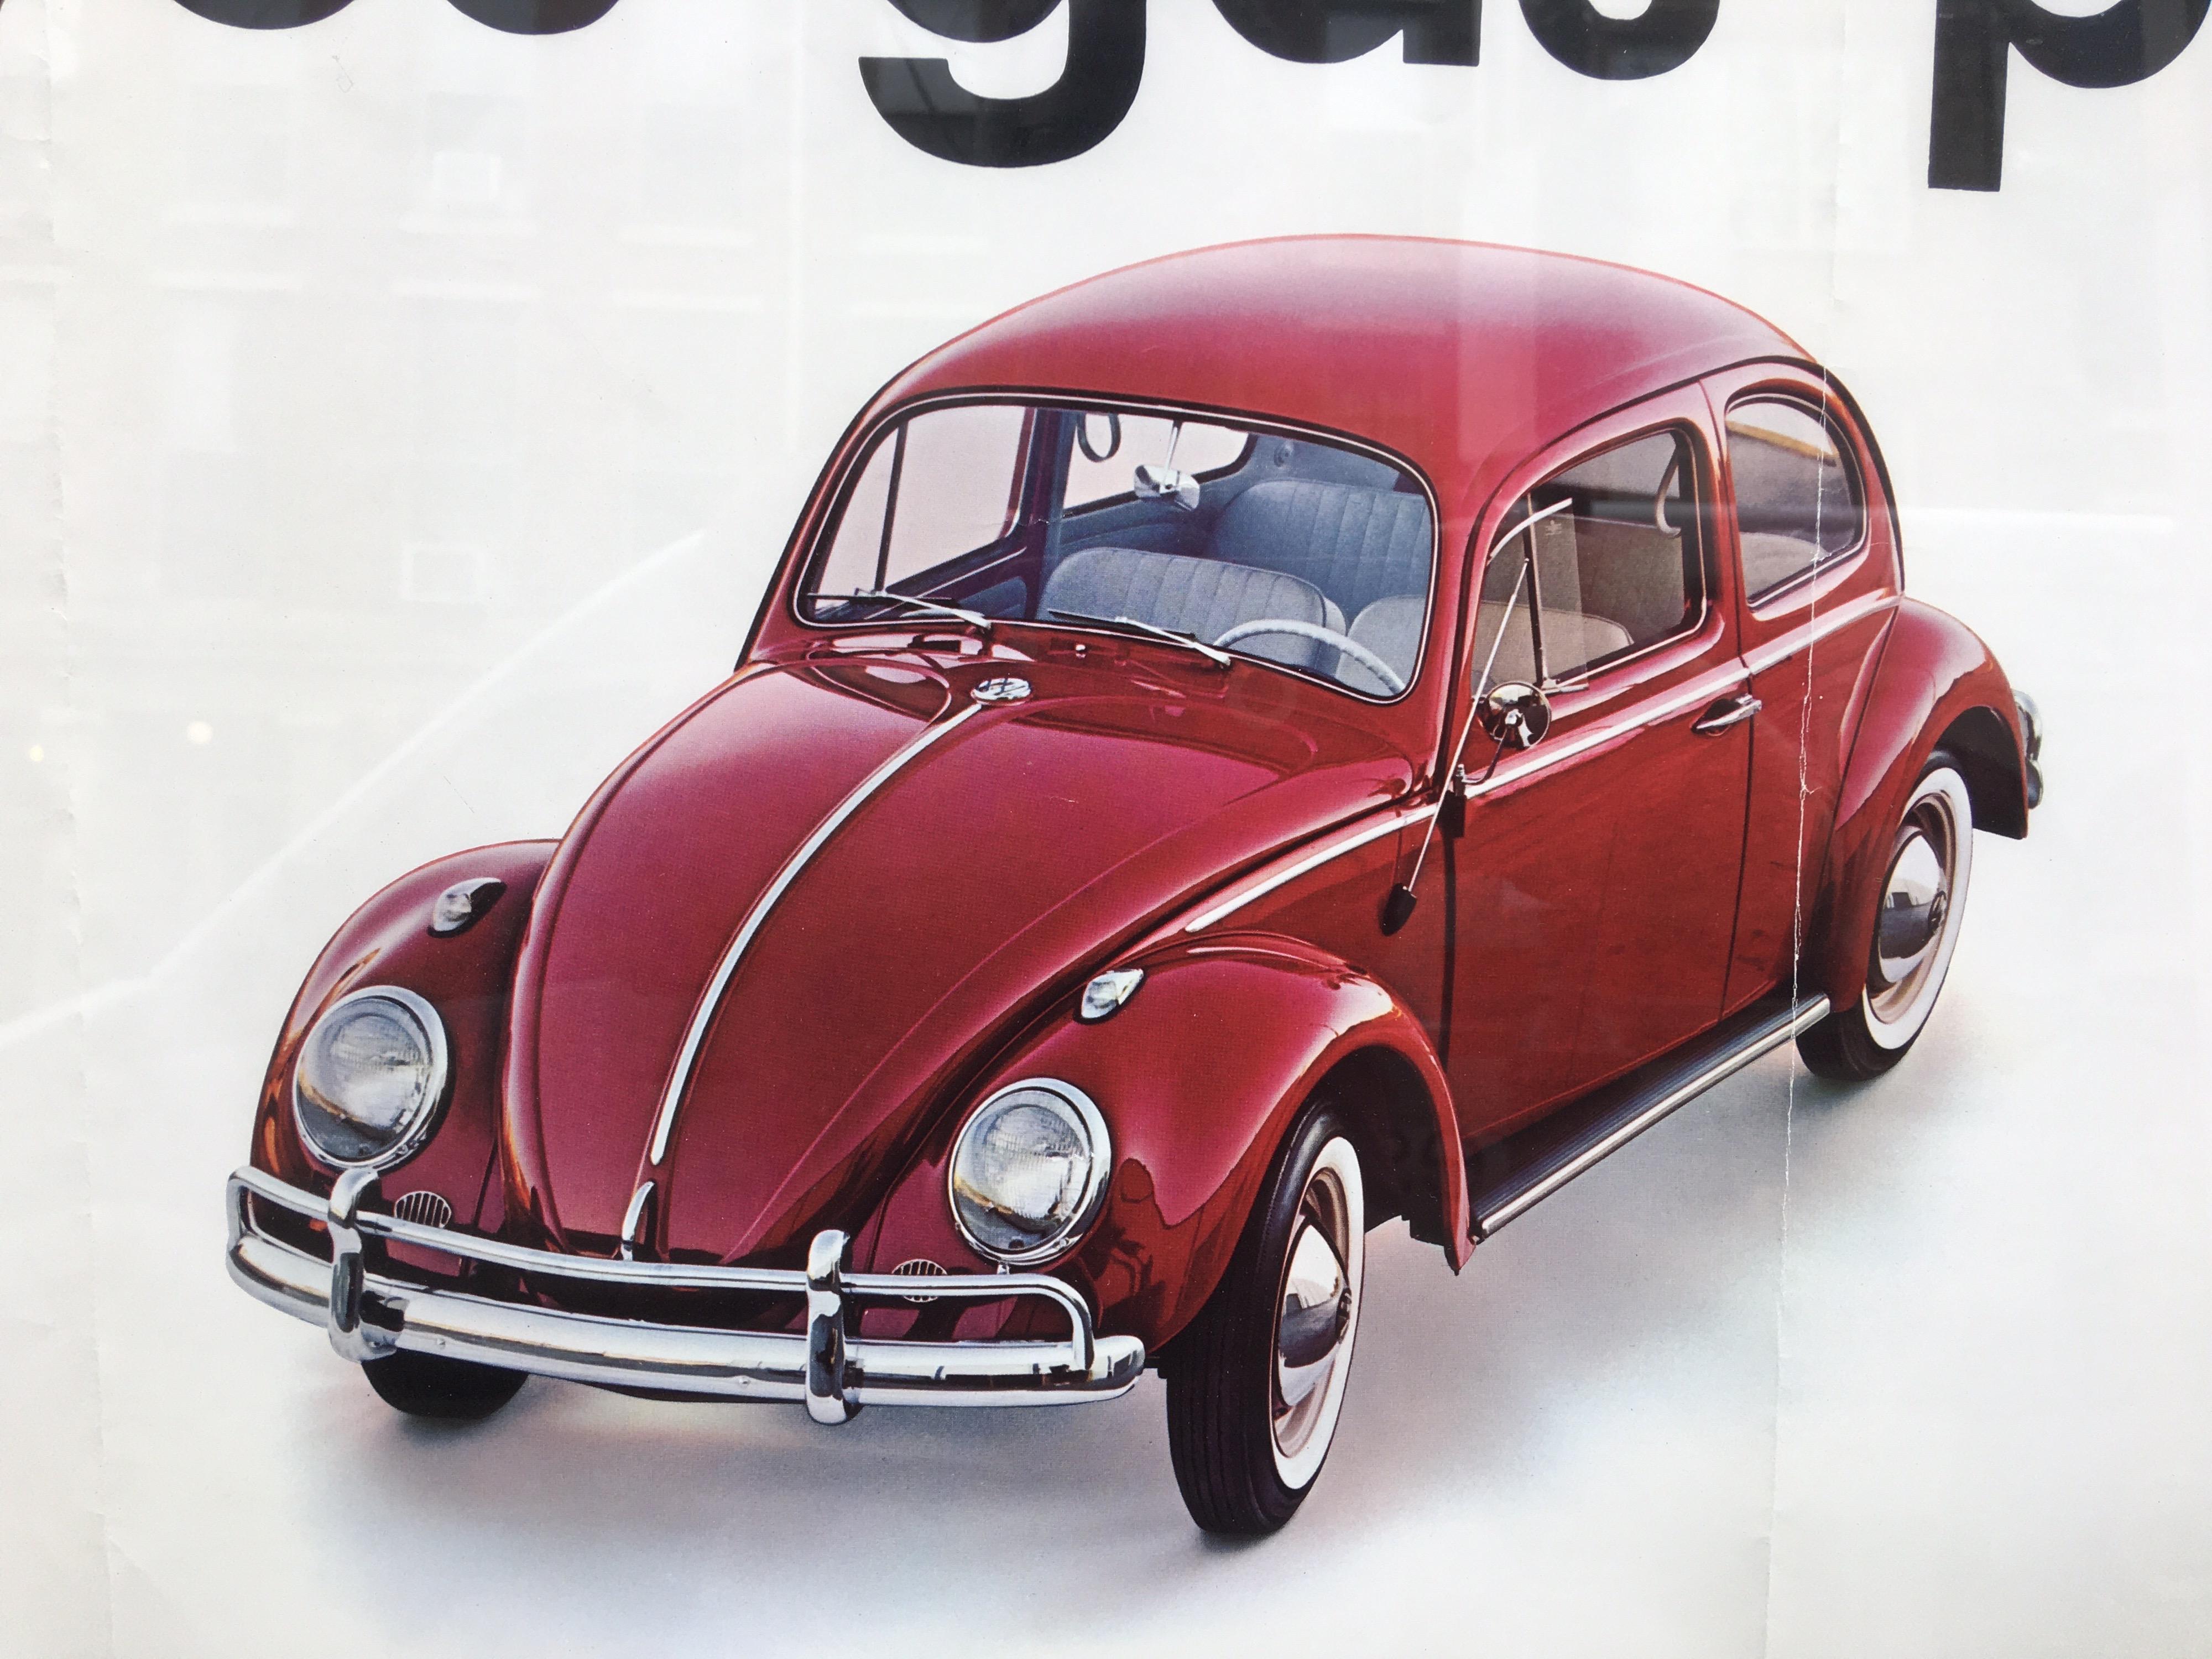 Early 1960's VW Dealership Poster. Posters were sent directly to VW Showrooms and displayed throughout. Posters were sent folded, hence the two creases.